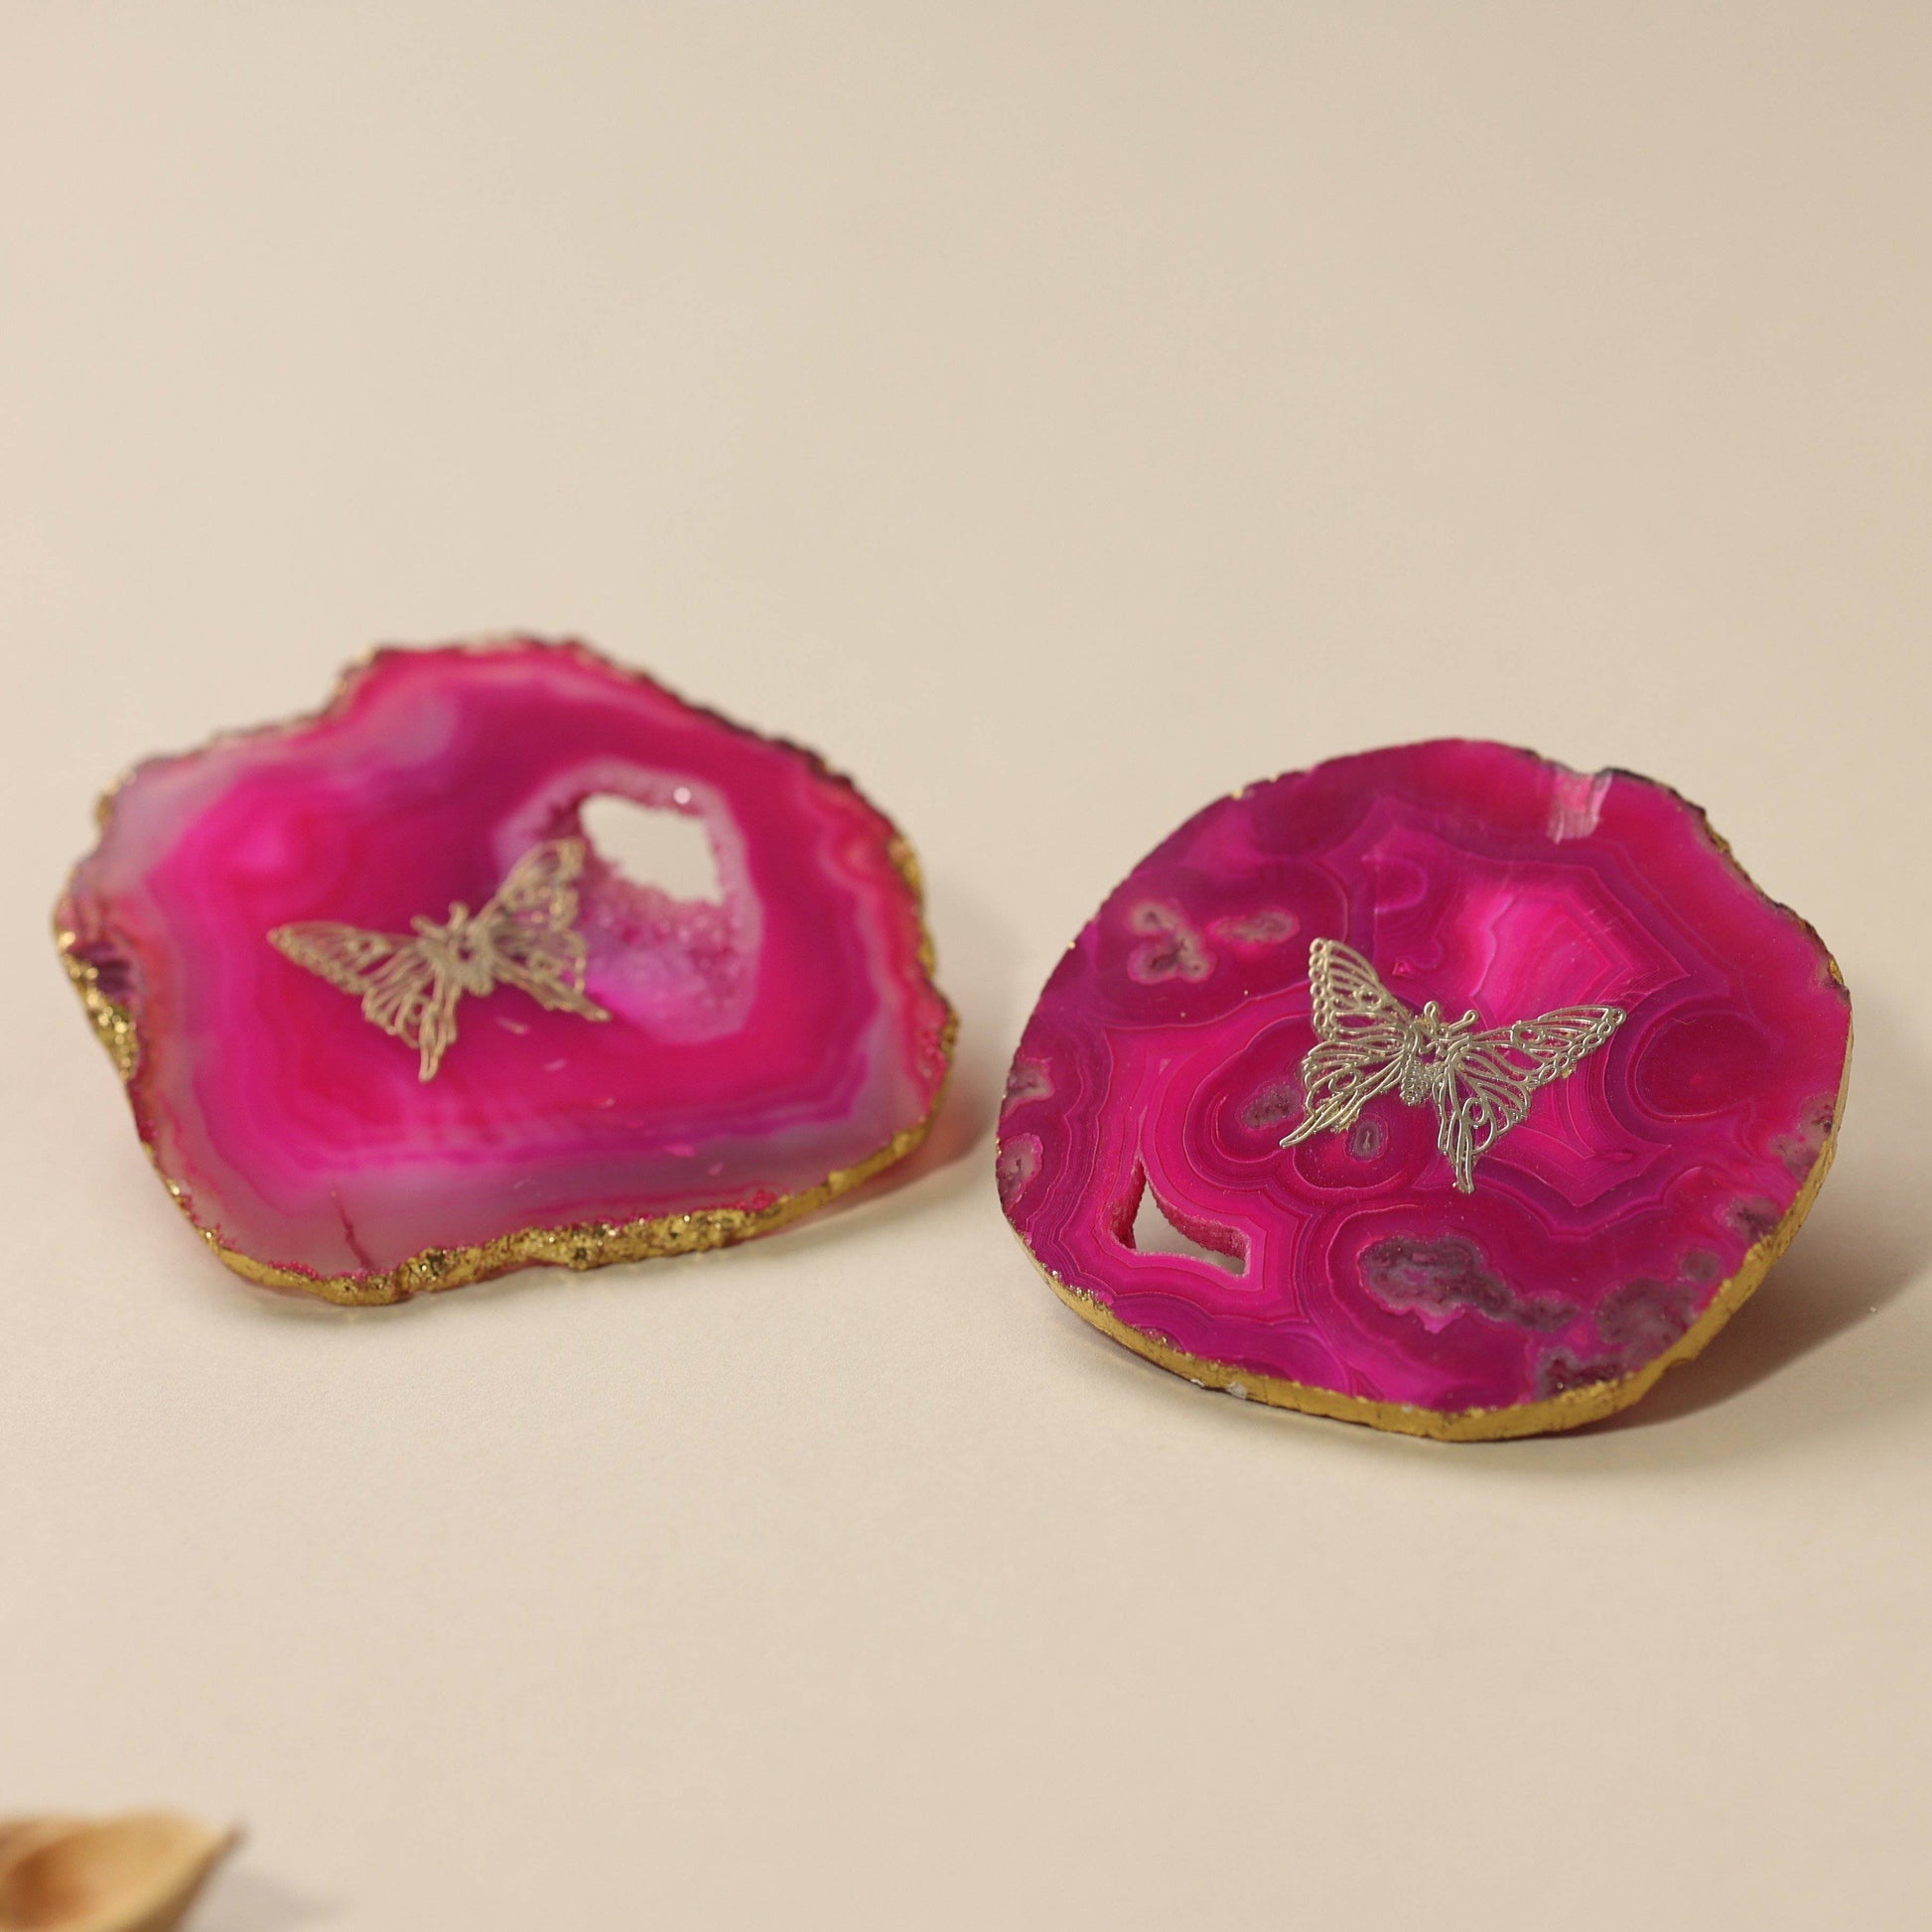 Home Decor Pink Butterfly Agate Coasters (set of 2) - The Decor Circle